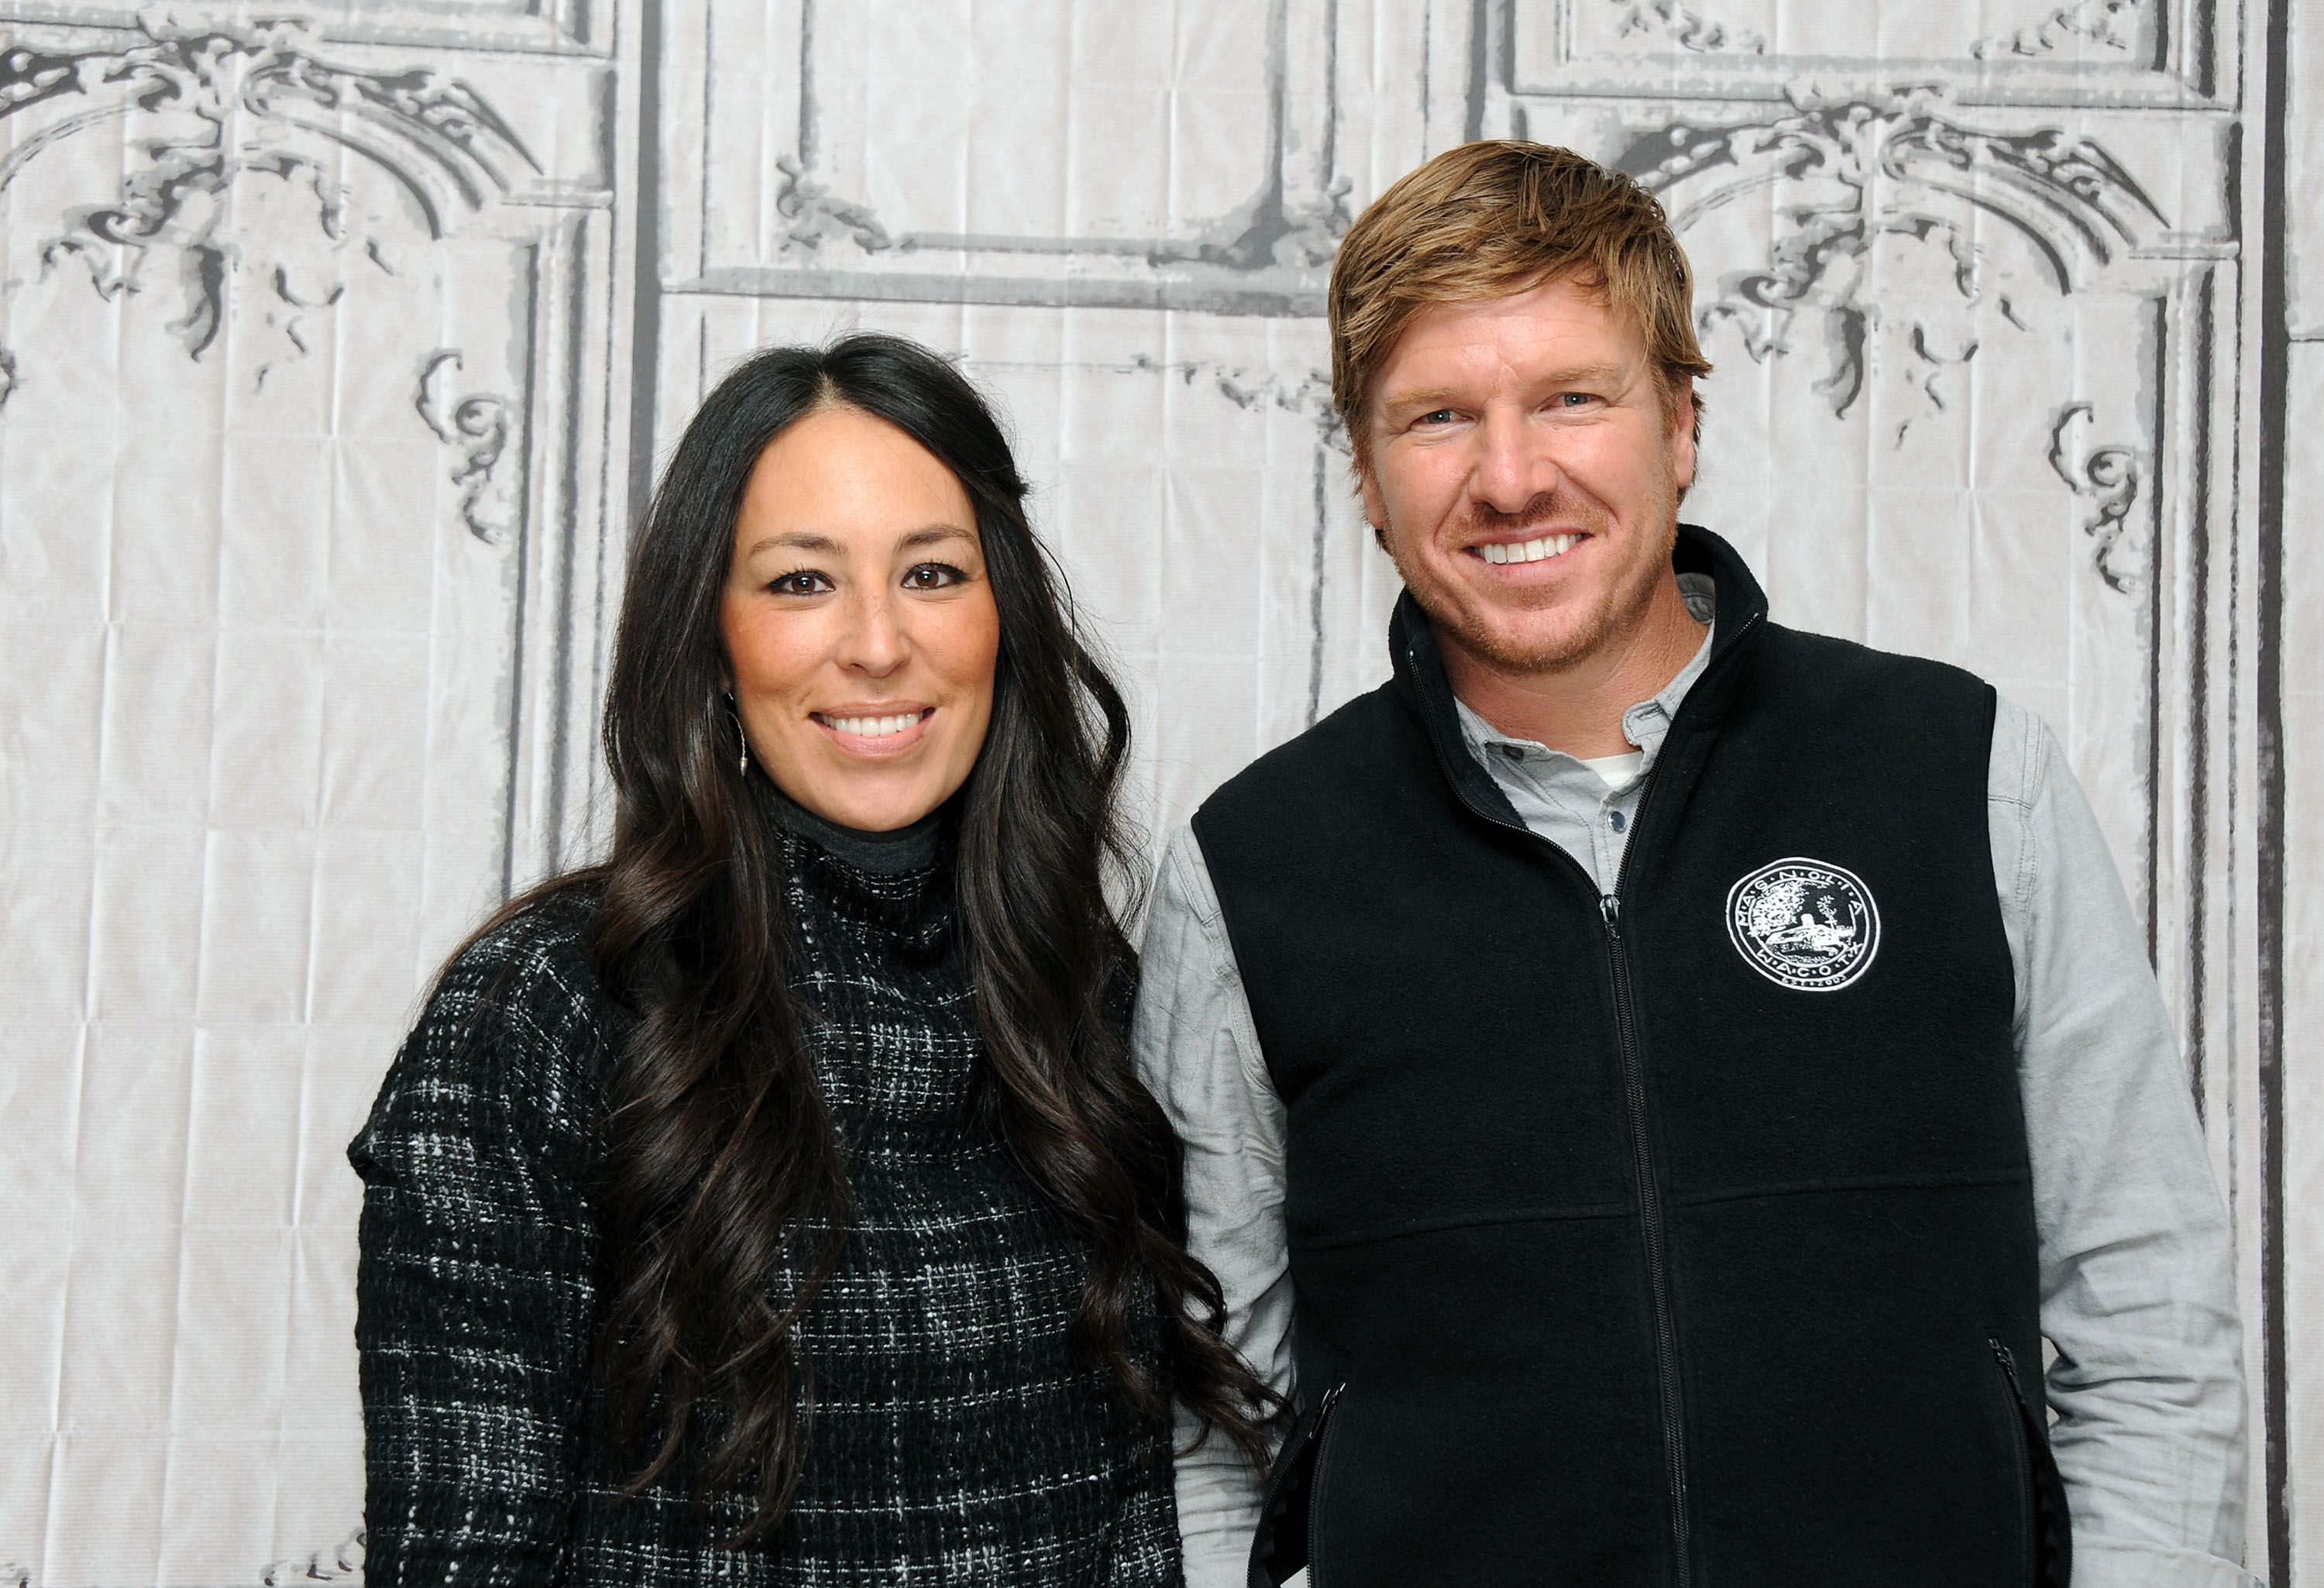 How to Watch Fixer Upper Online - Is Fixer Upper on Hulu